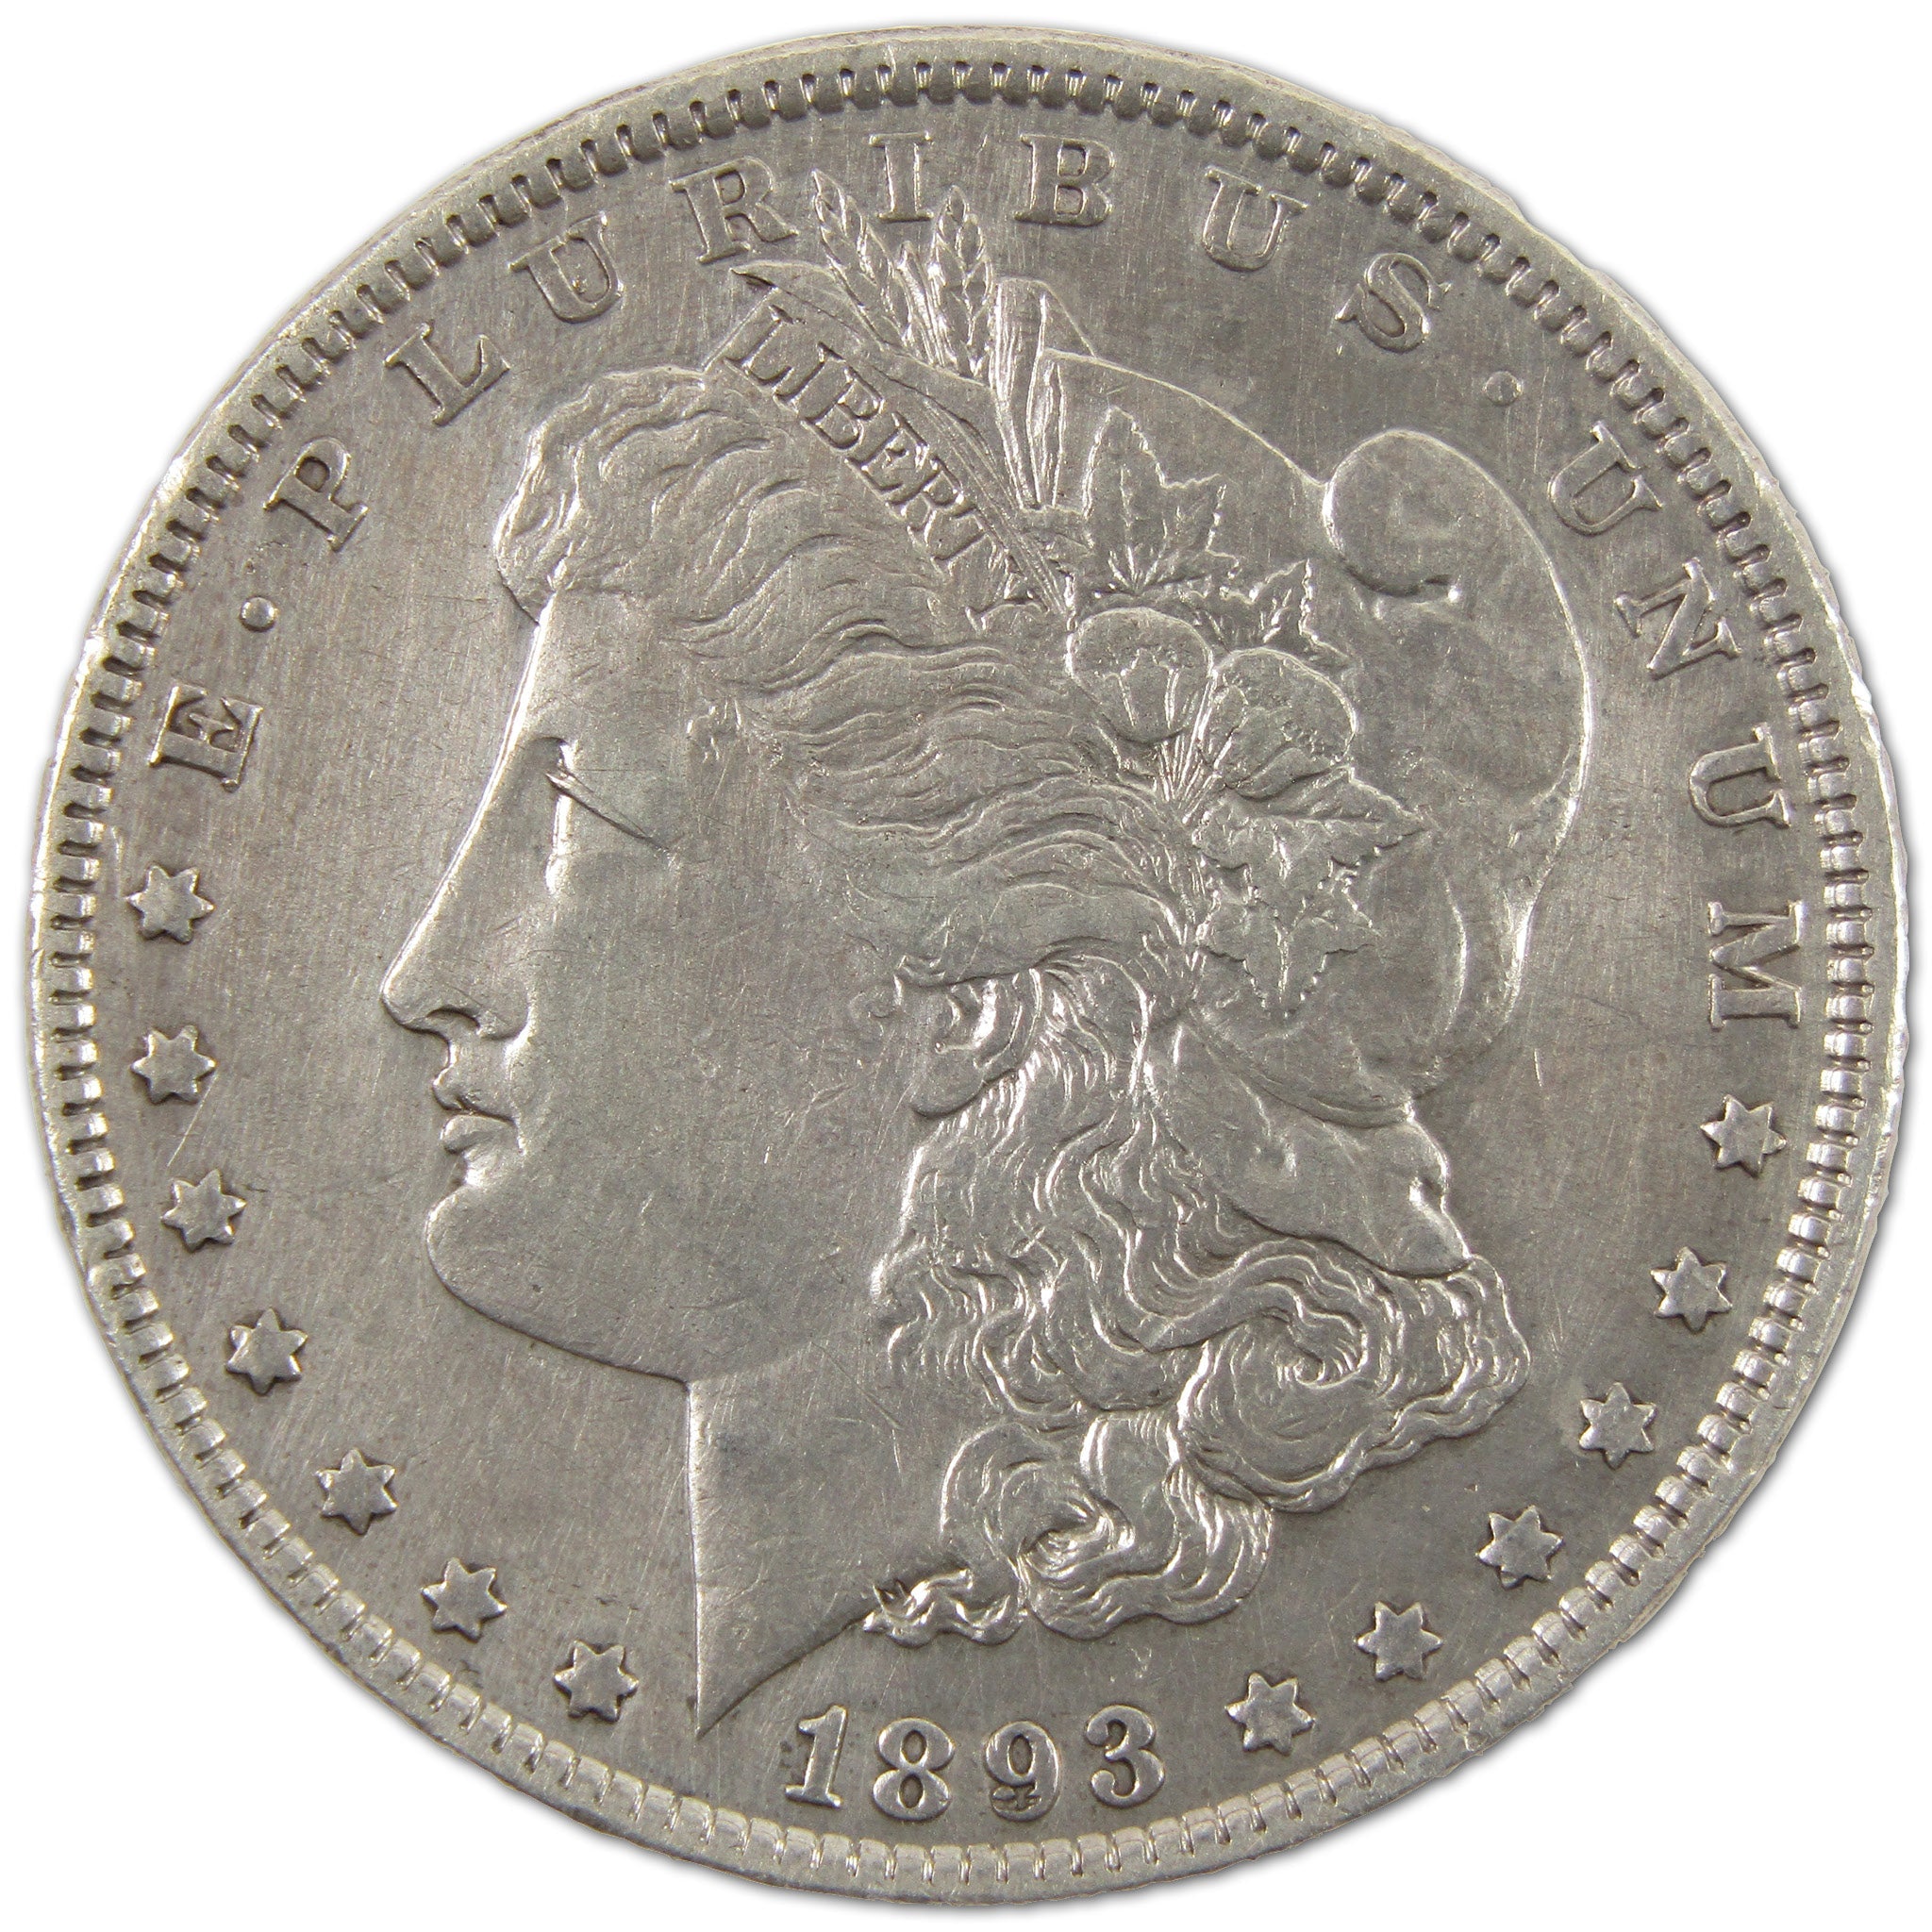 1893 Morgan Dollar XF EF Extremely Fine Details Silver $1 SKU:I10815 - Morgan coin - Morgan silver dollar - Morgan silver dollar for sale - Profile Coins &amp; Collectibles